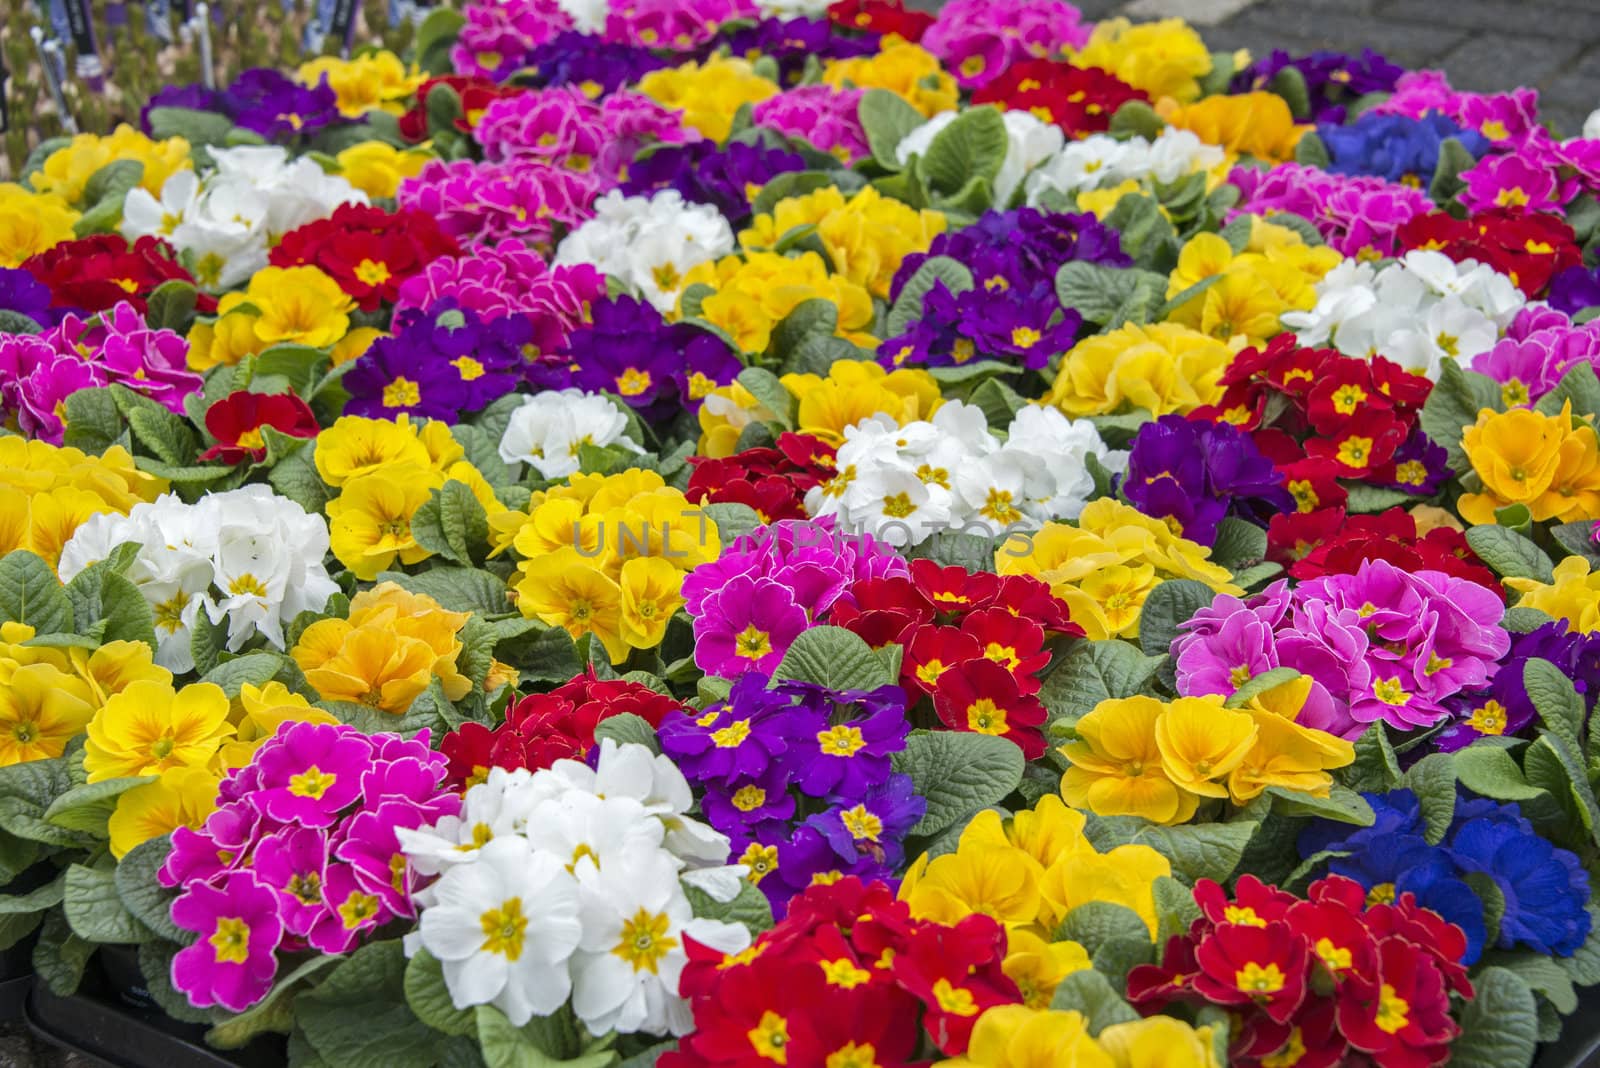 primula flowers in red yellow pink and white